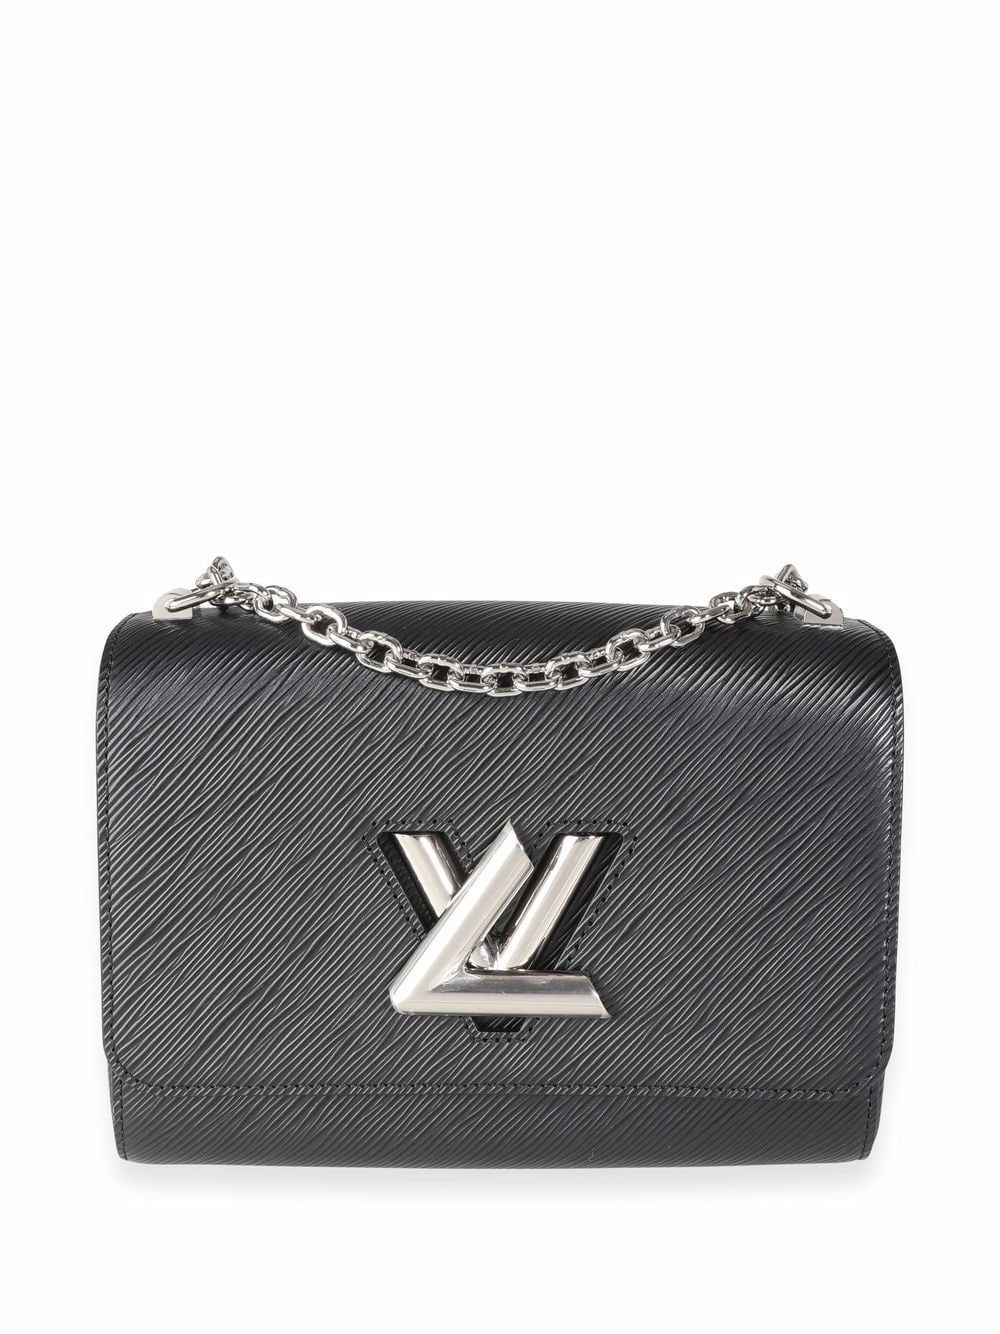 MANIFESTO - THE OTHER TYPE OF FRENCH TWIST: Louis Vuitton's Twist MM Bag  in Padded Leather